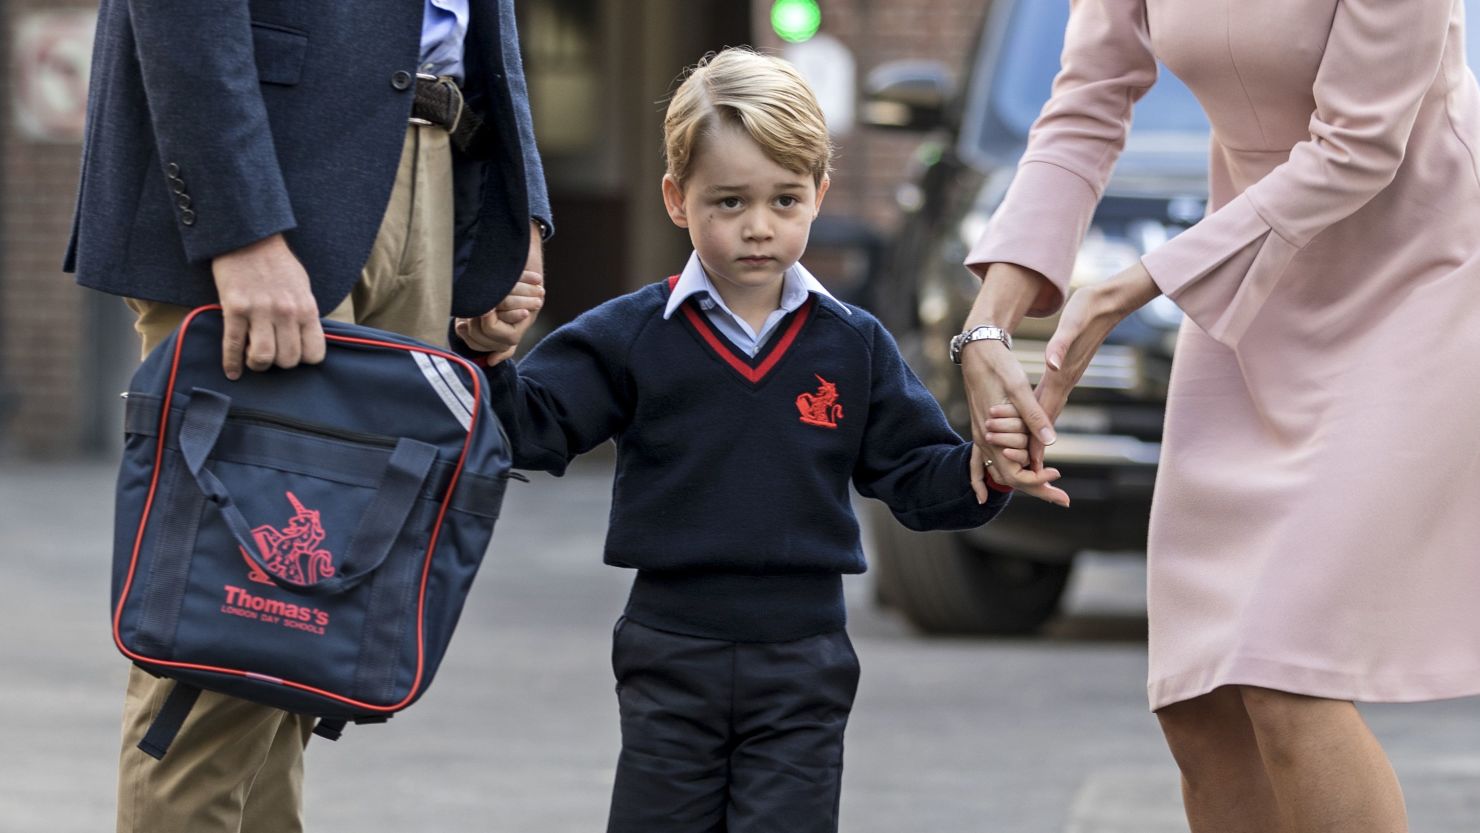 Britain's Prince George arrives for his first day of school at Thomas's Battersea on September 7, 2017.